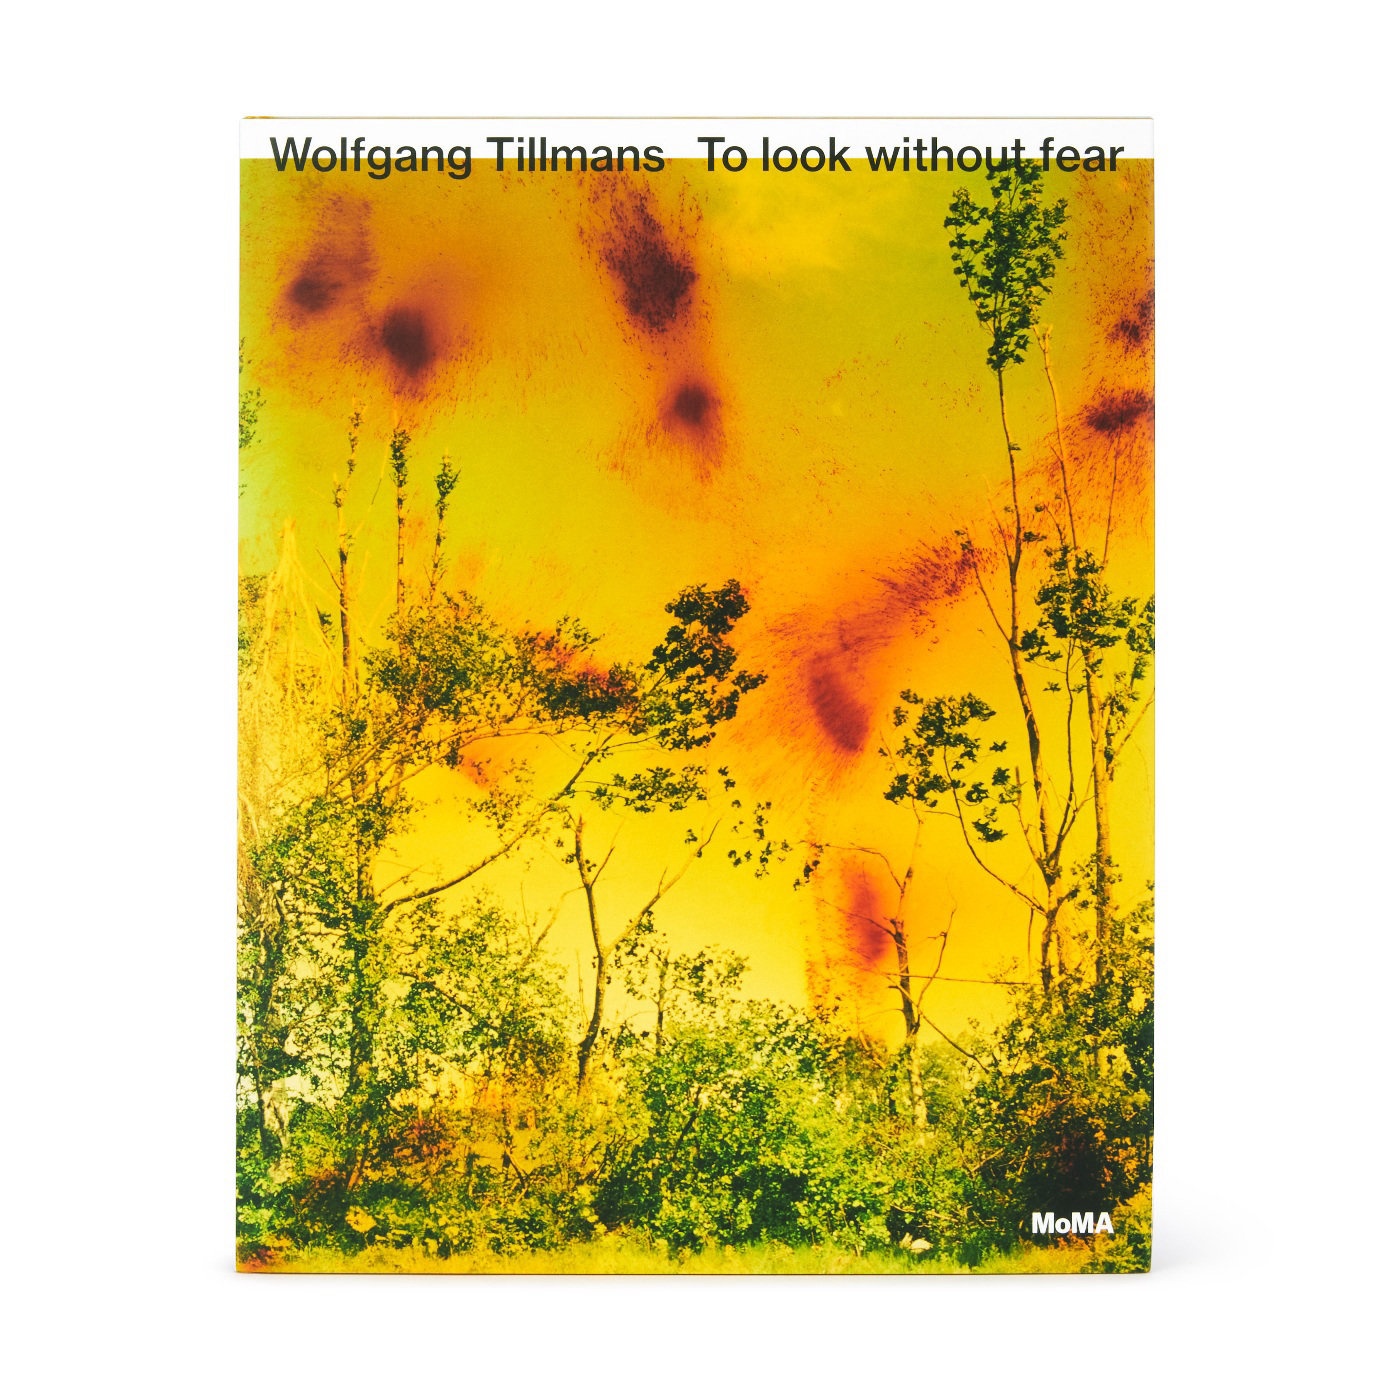 To look without fear by Wolfgang Tillmans